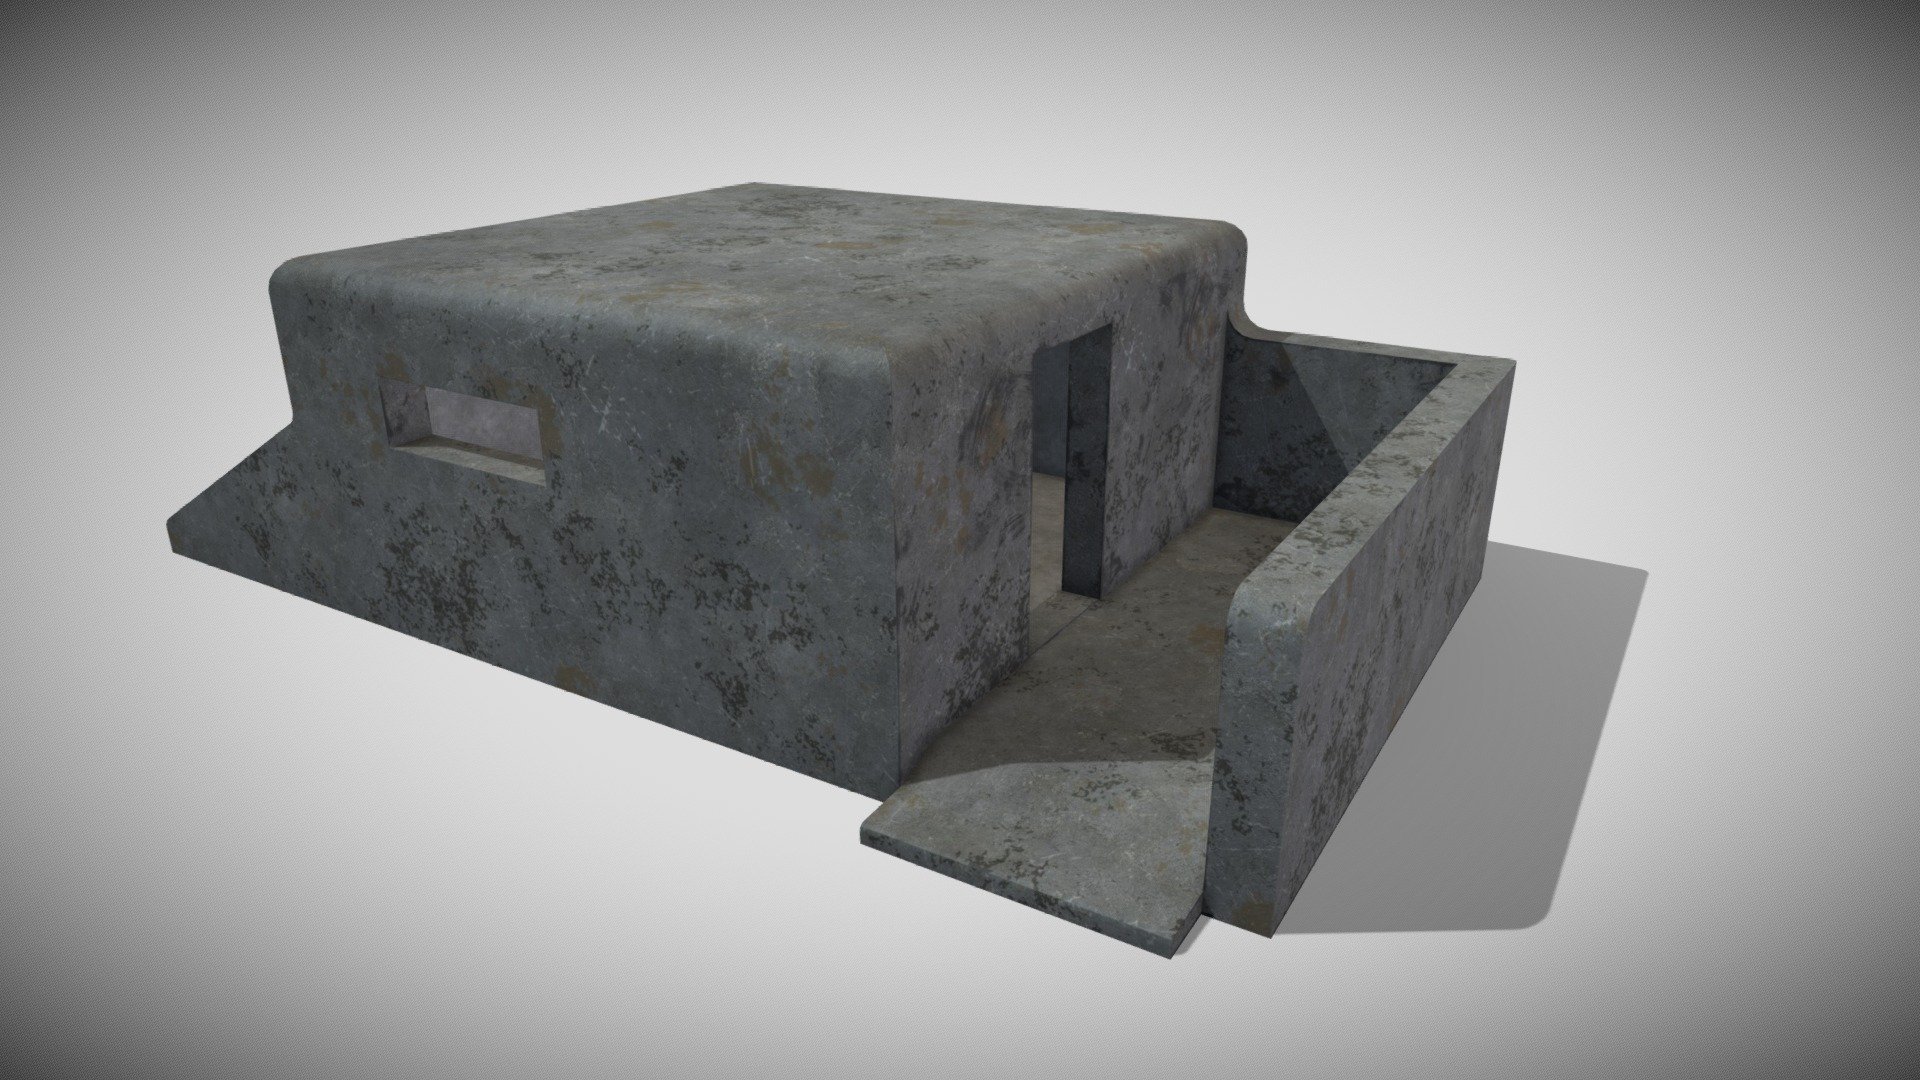 WW2 Field Bunker

This is a reworked version of my previous simple bunker.
Modeled in Blender and textured with Substance painter.

Low poly &amp; Game Ready - WW2 Field Bunker - Download Free 3D model by Golden (@goldenblack4) 3d model